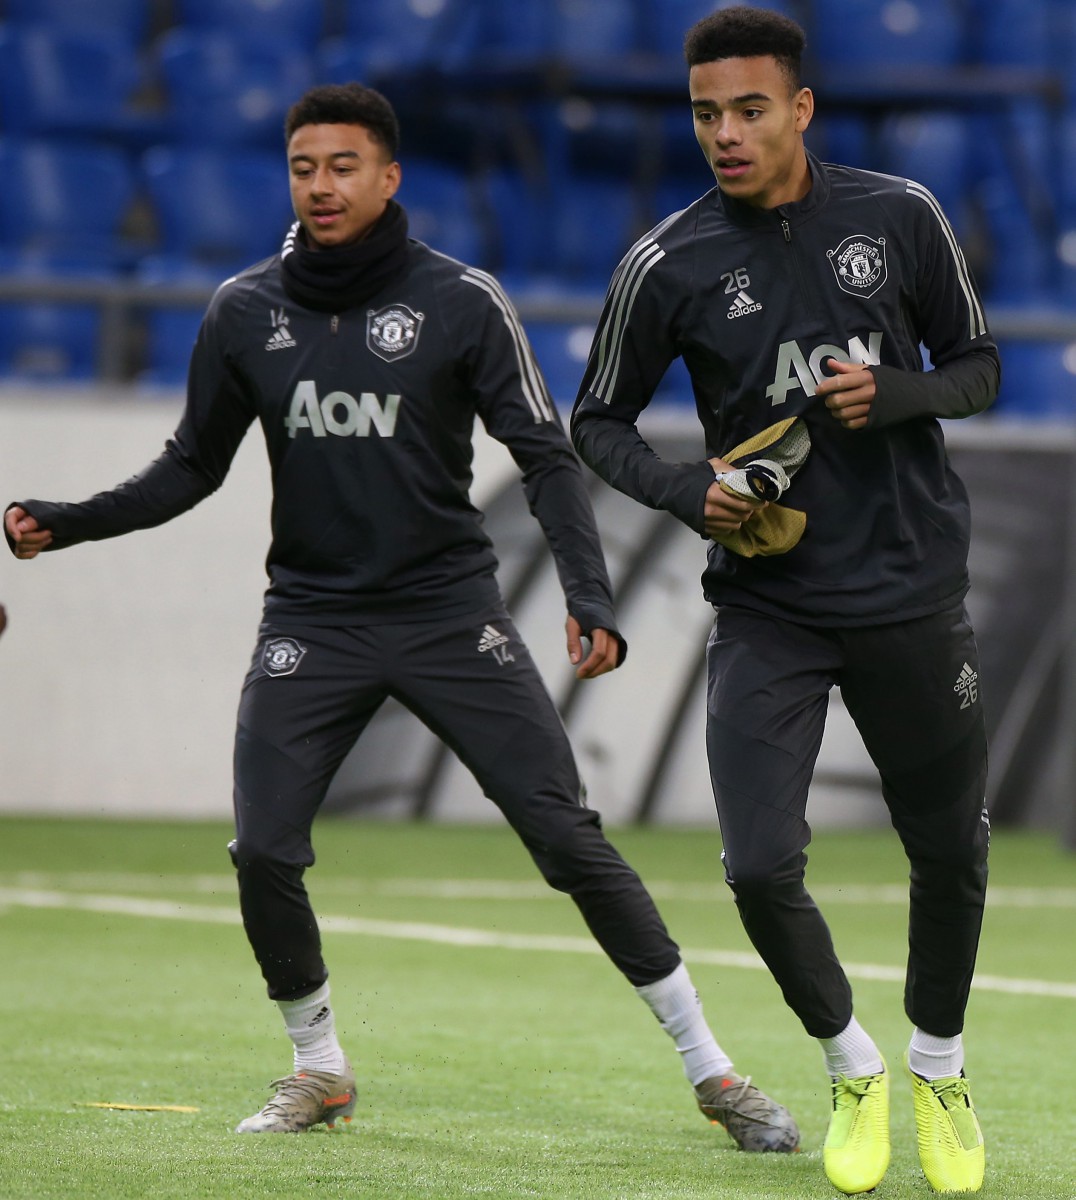 , Max Taylor feared cancer would kill him as Solskjaer hails Man Utd kid as an inspiration who plays without fear